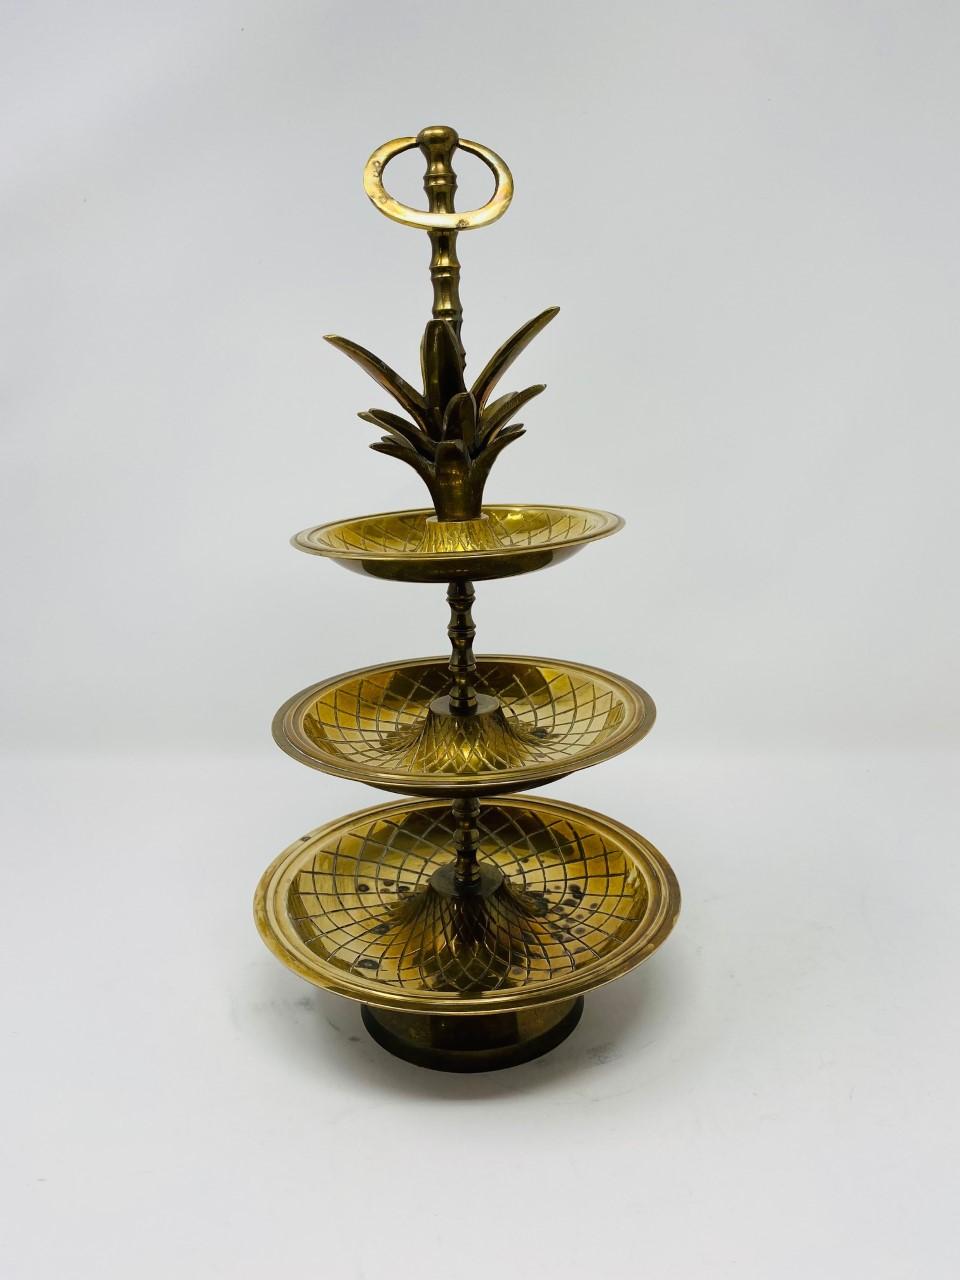 Beautiful Hollywood Regency brass 3-tier pineapple nesting serving tray stand from the 1970s that is relevant, current and stylish. A glamorous addition to your bar or table escape or a signature piece full of chic for your vanity. Incredible piece